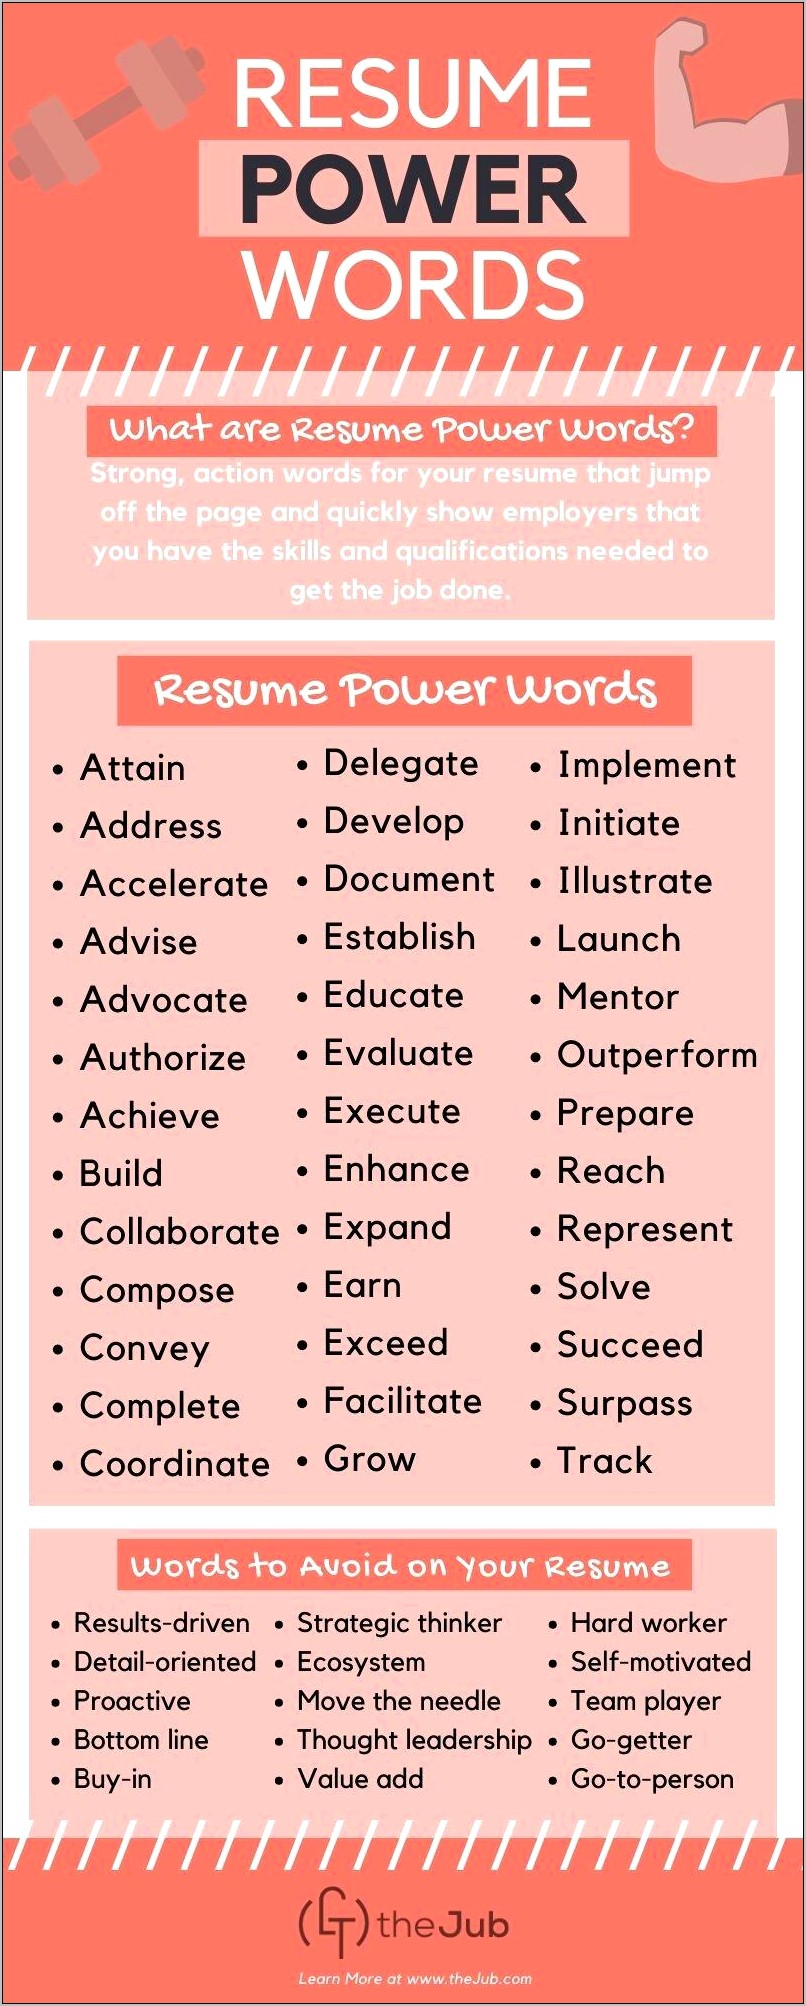 Better Word For Managing In A Resume